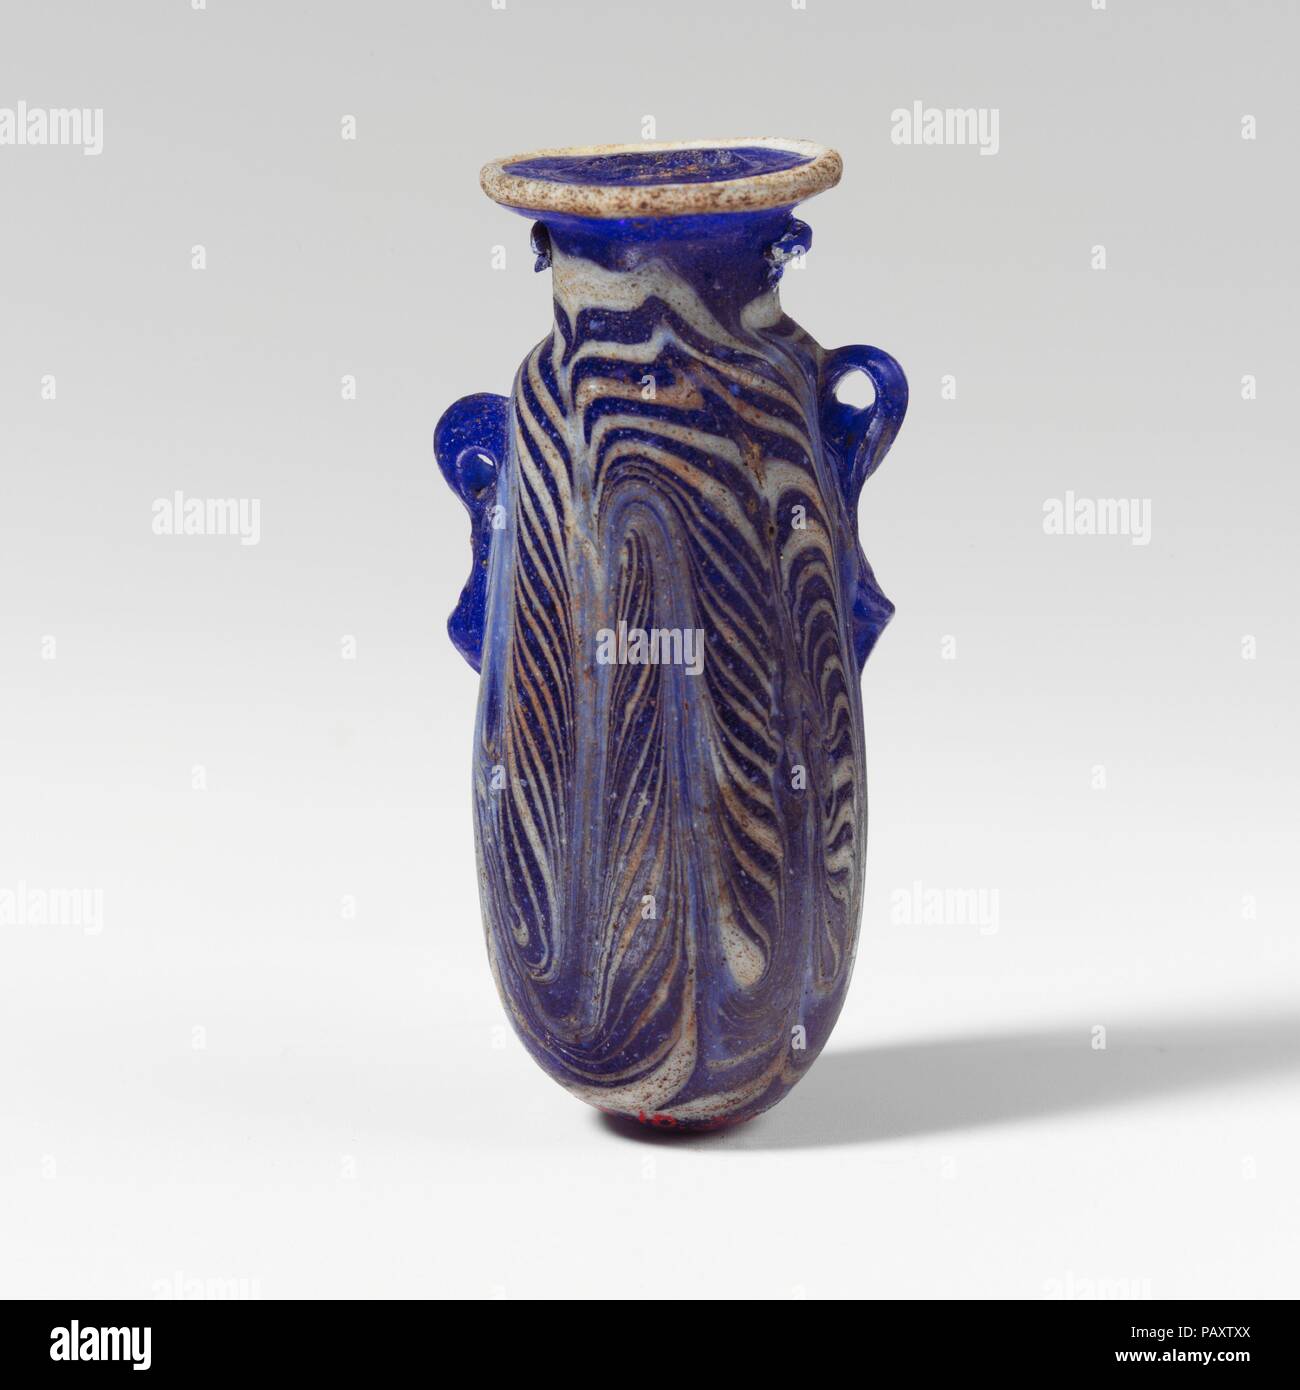 Glass alabastron (perfume bottle). Culture: Greek, Eastern Mediterranean. Dimensions: H.: 2 1/2 in. (6.4 cm). Date: late 6th-5th century B.C..  Translucent cobalt blue, with handles in same color; trails in opaque white.  Slightly concave horizontal rim-disk, with projecting rough edge to mouth; cylindrical neck; narrow rounded shoulder; slightly convex sides to cylindrical body, tapering upwards; convex bottom; two vertical ring handles with knobbed tails, applied over trail decoration; one larger and higher than the other.  A trail attached at edge of rim-disk; another trail applied on neck  Stock Photo